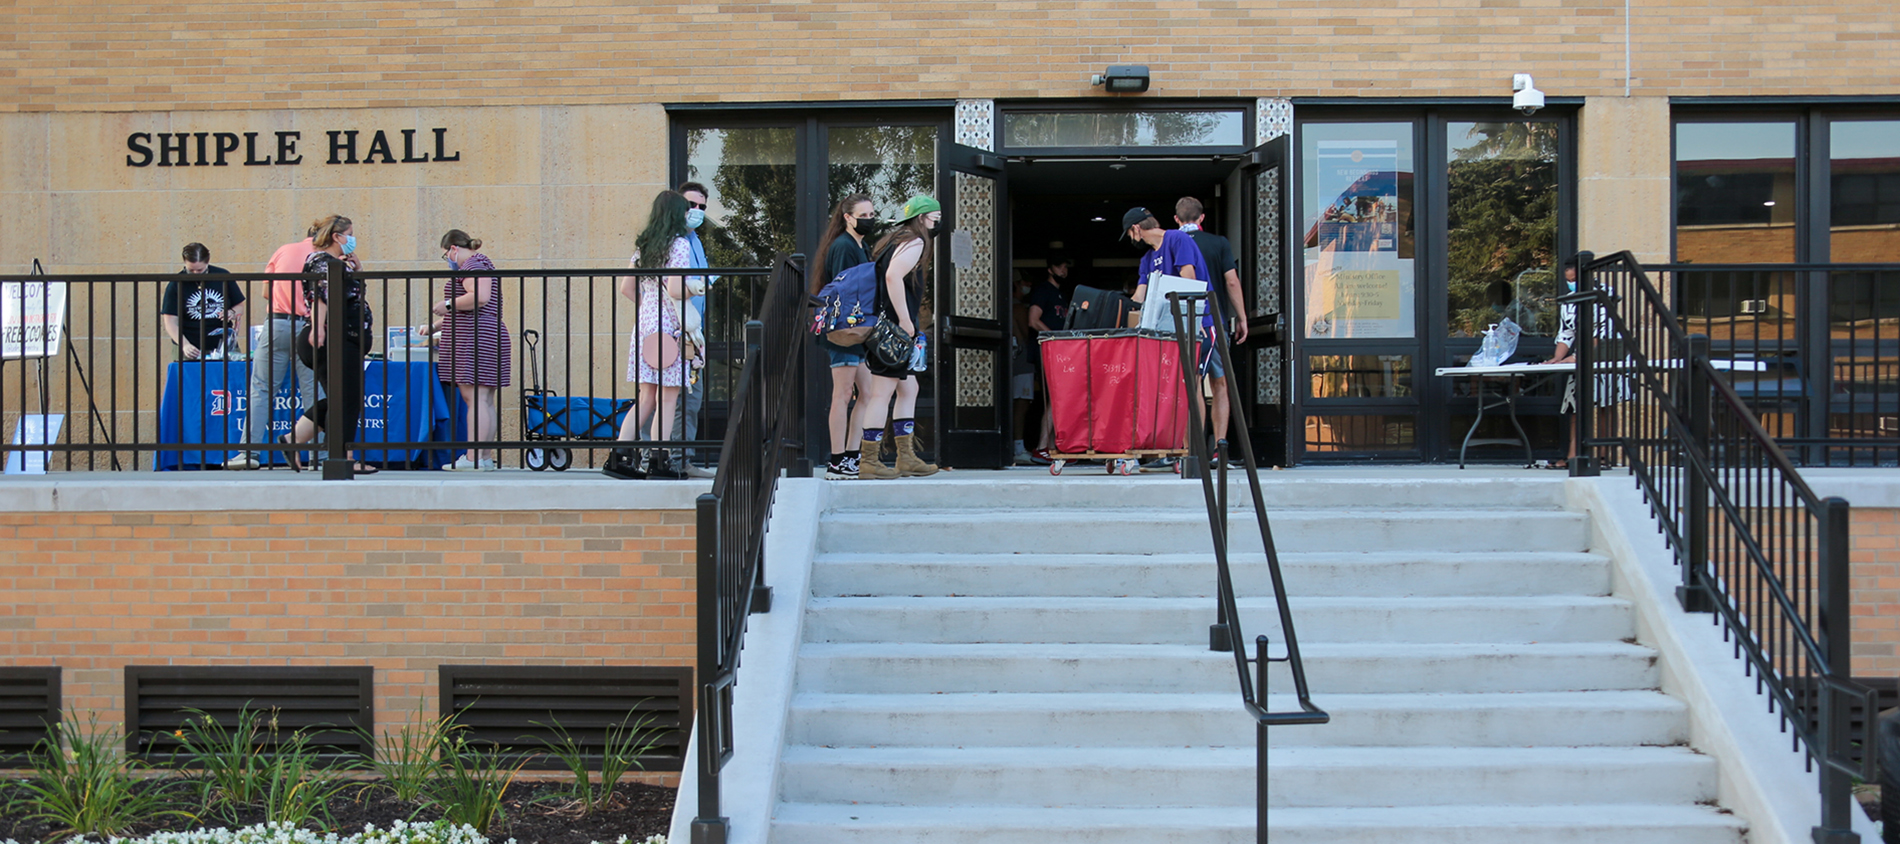 Students and their families enter Shiple Hall during freshman move-in day.